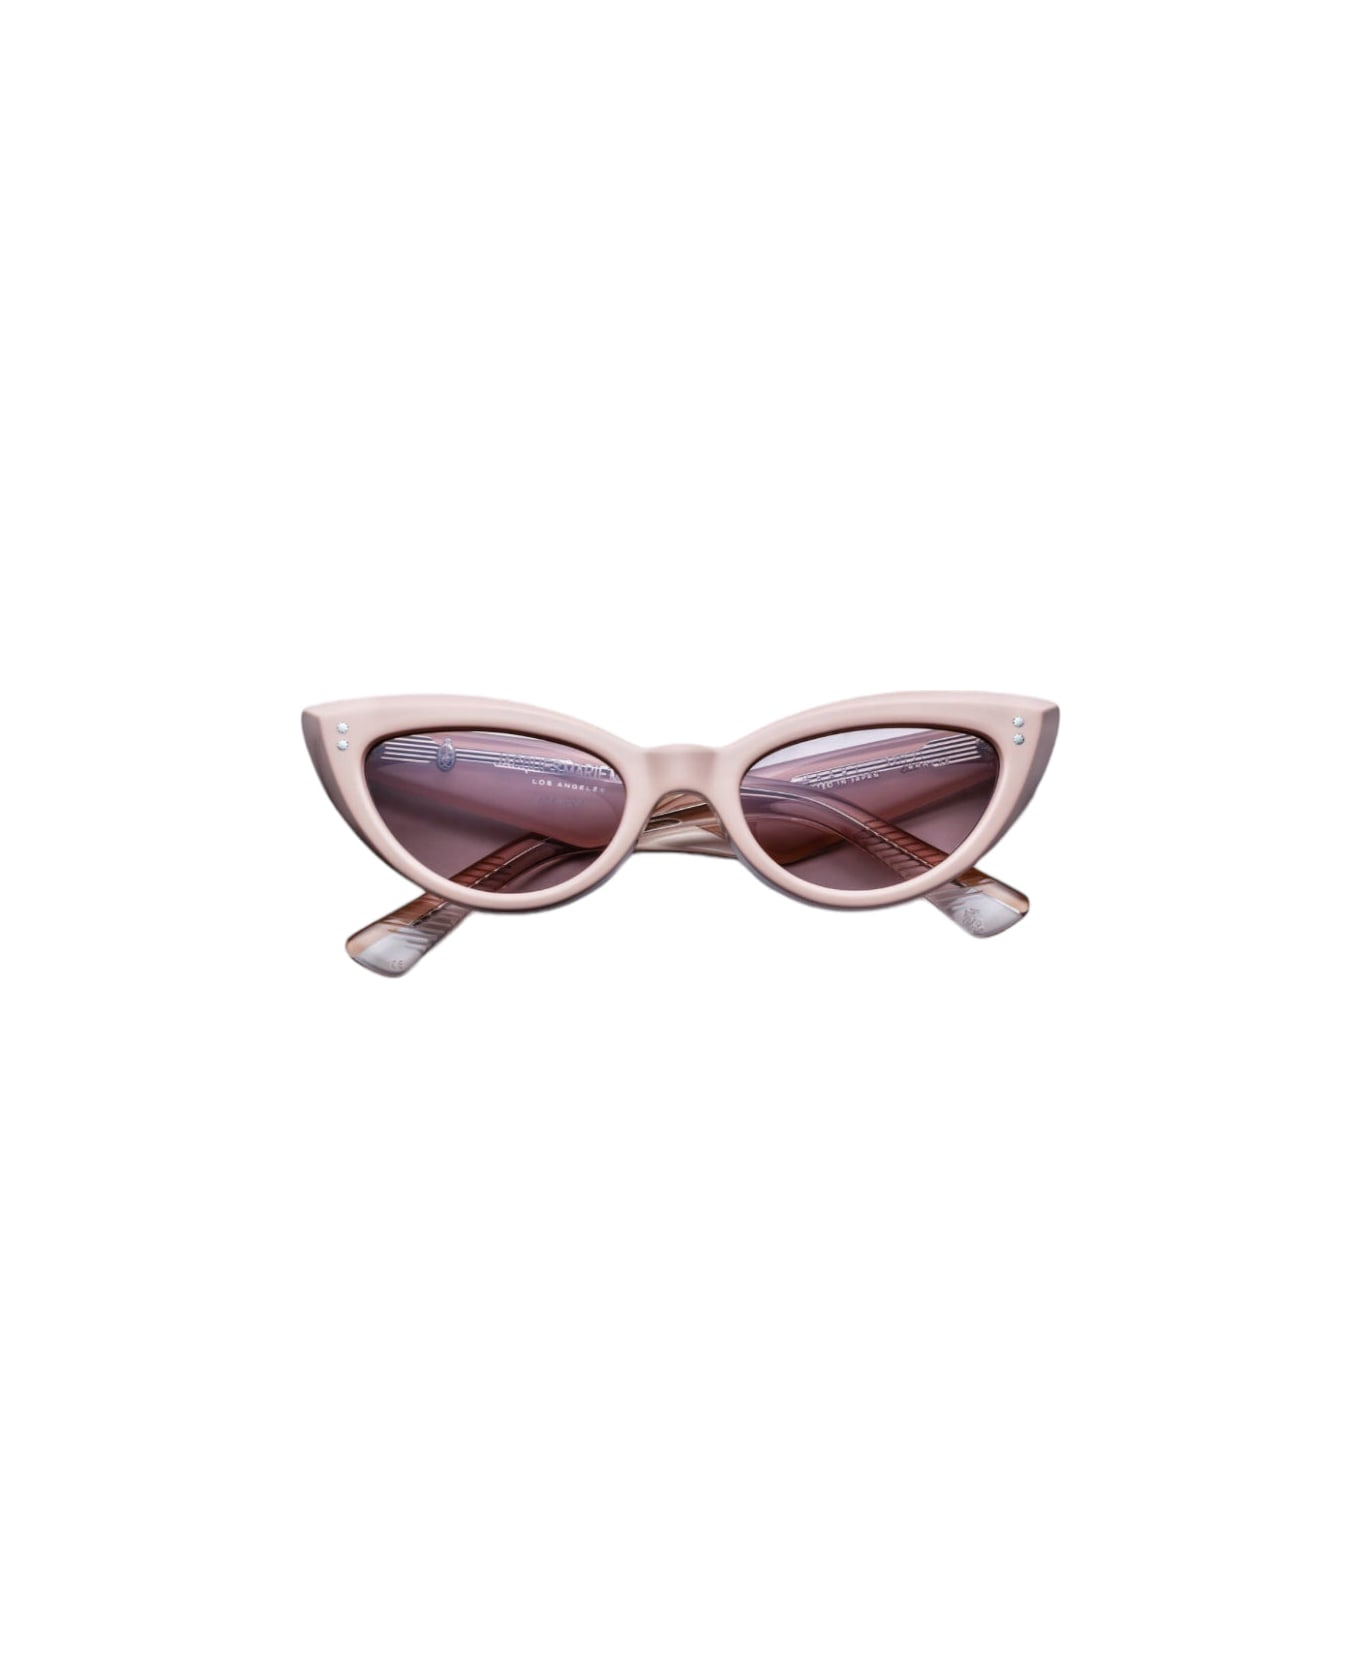 Jacques Marie Mage Heart - Nude Light Pink Sunglasses